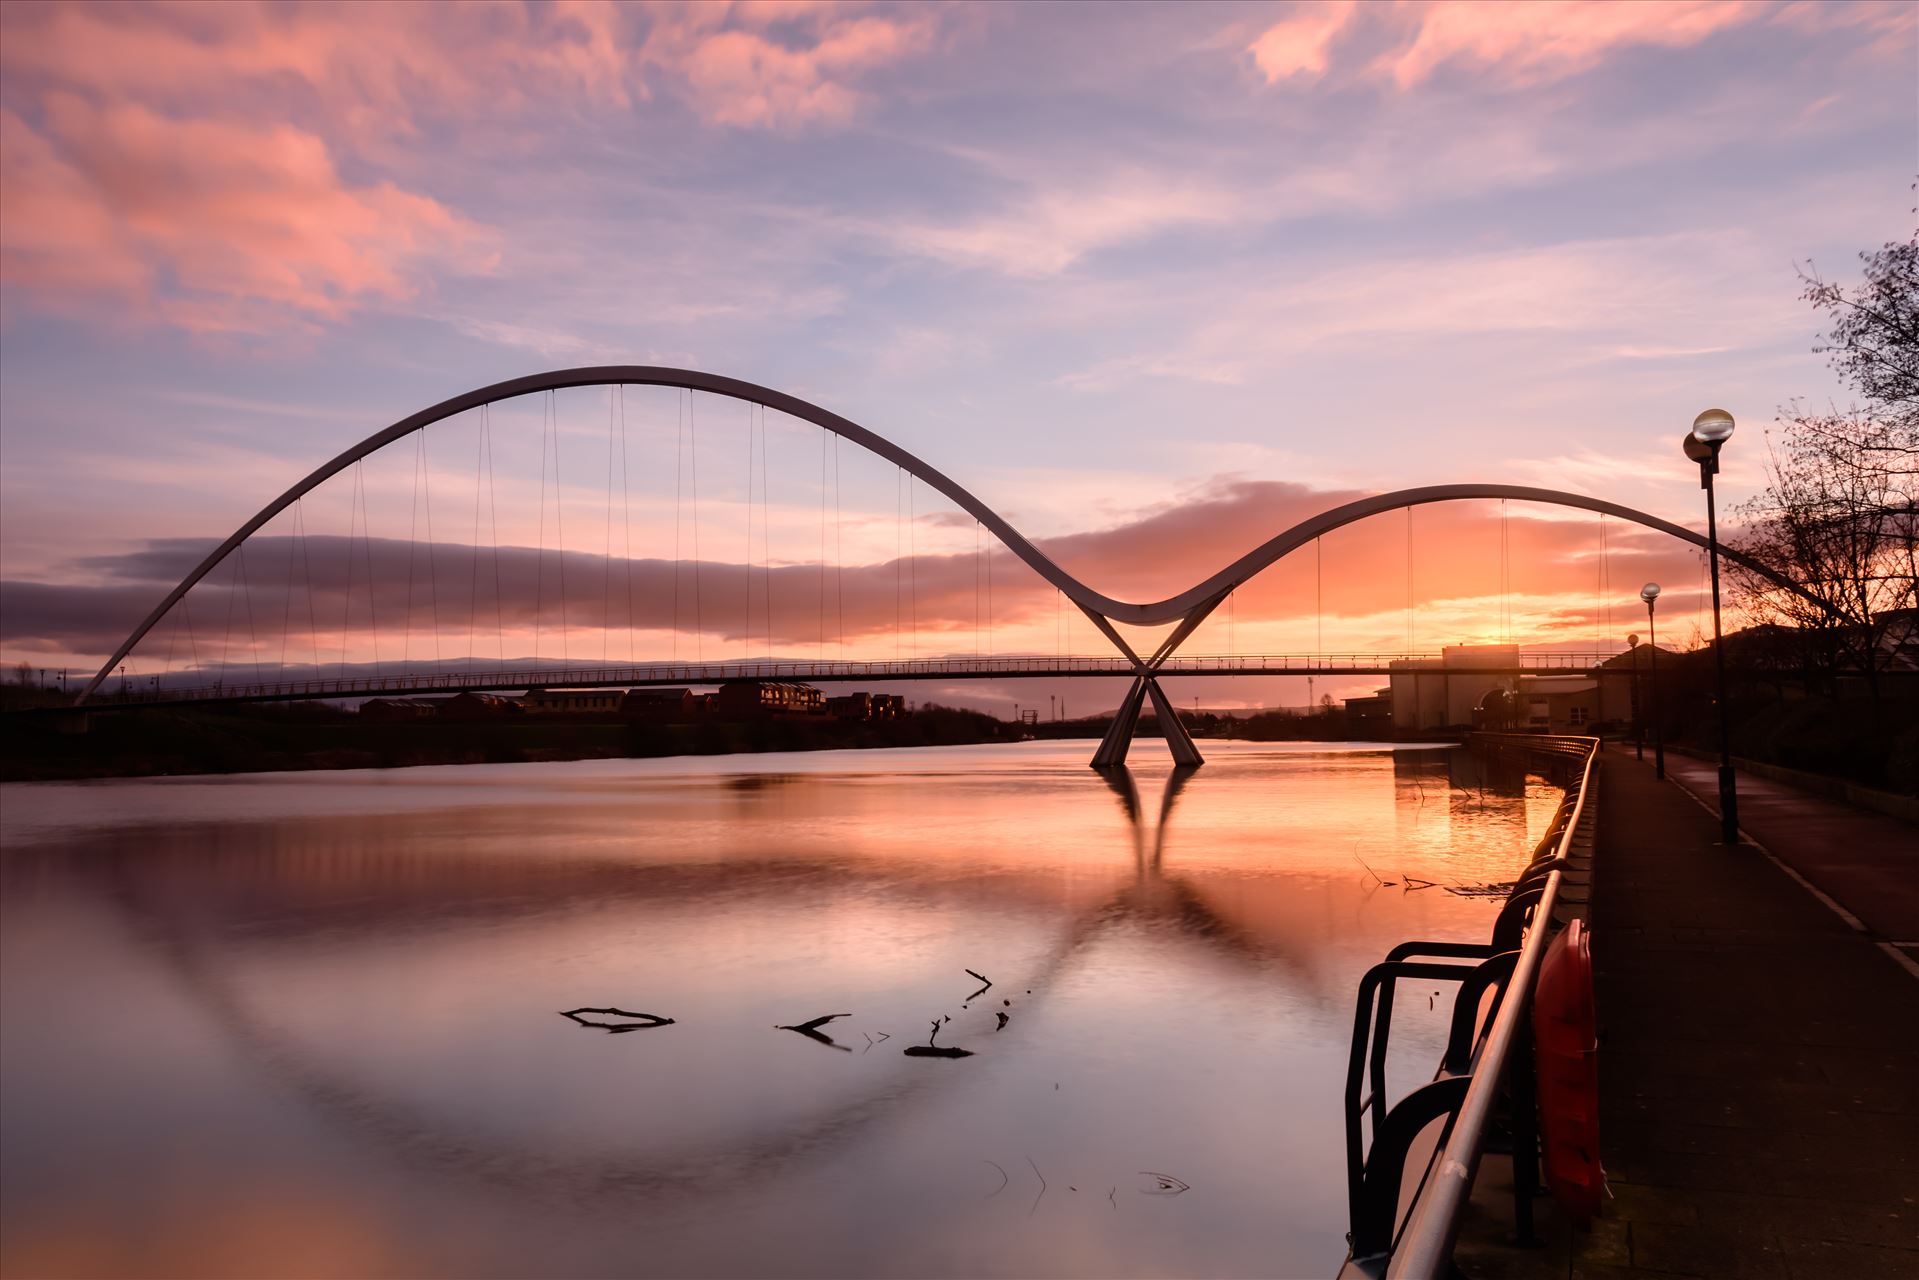 The Infinity Bridge 12 The Infinity Bridge is a public pedestrian and cycle footbridge across the River Tees that was officially opened on 14 May 2009 at a cost of £15 million. by philreay